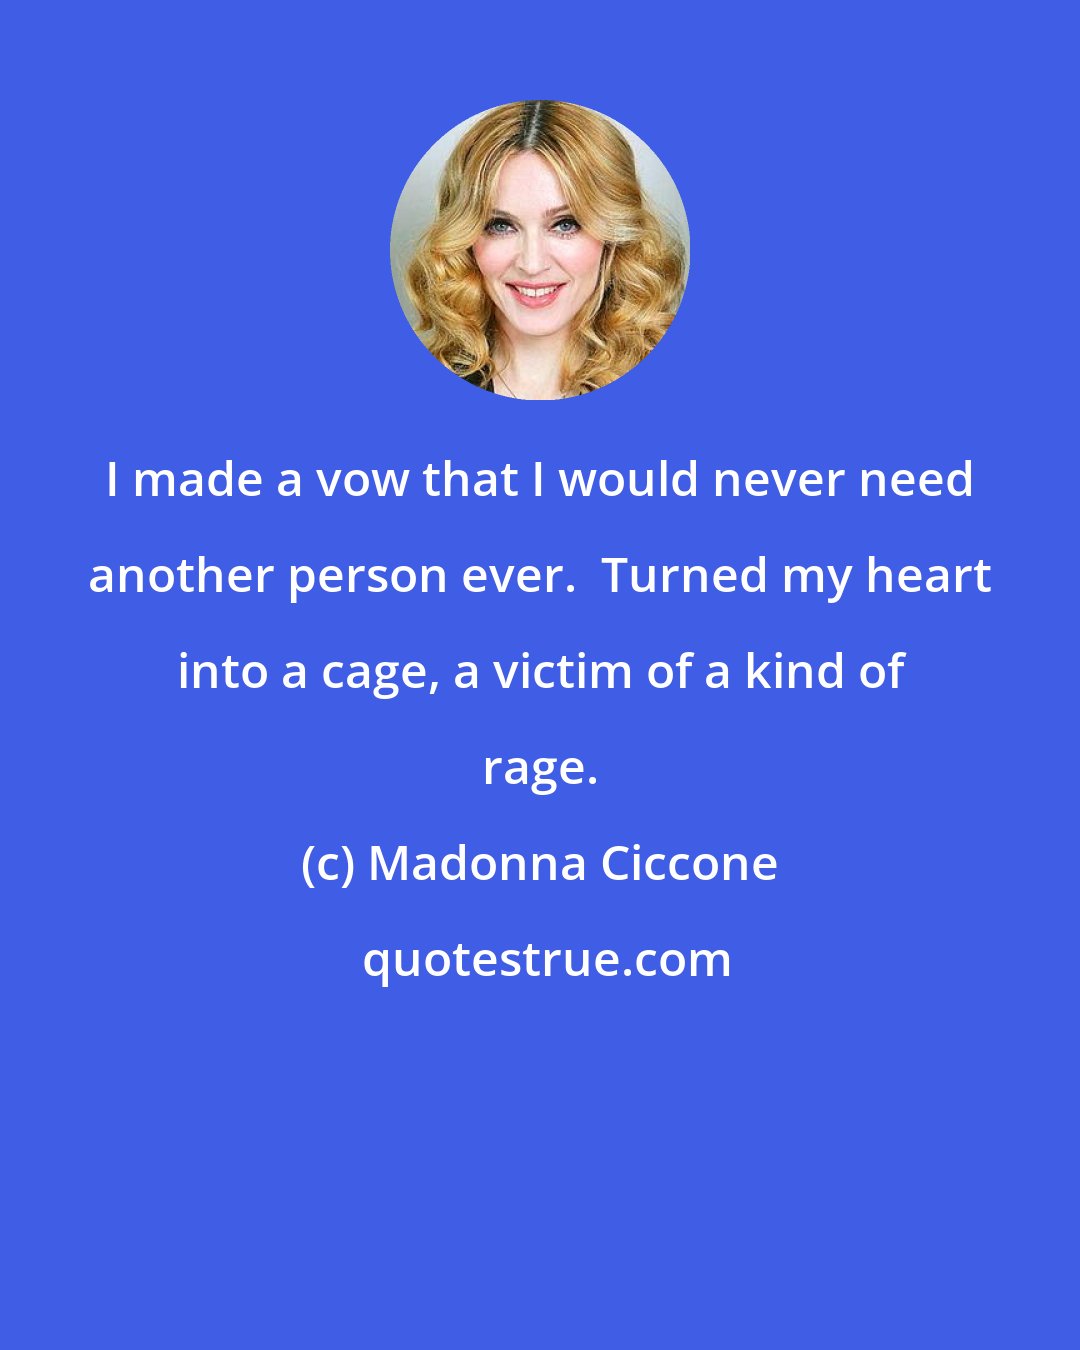 Madonna Ciccone: I made a vow that I would never need another person ever.  Turned my heart into a cage, a victim of a kind of rage.